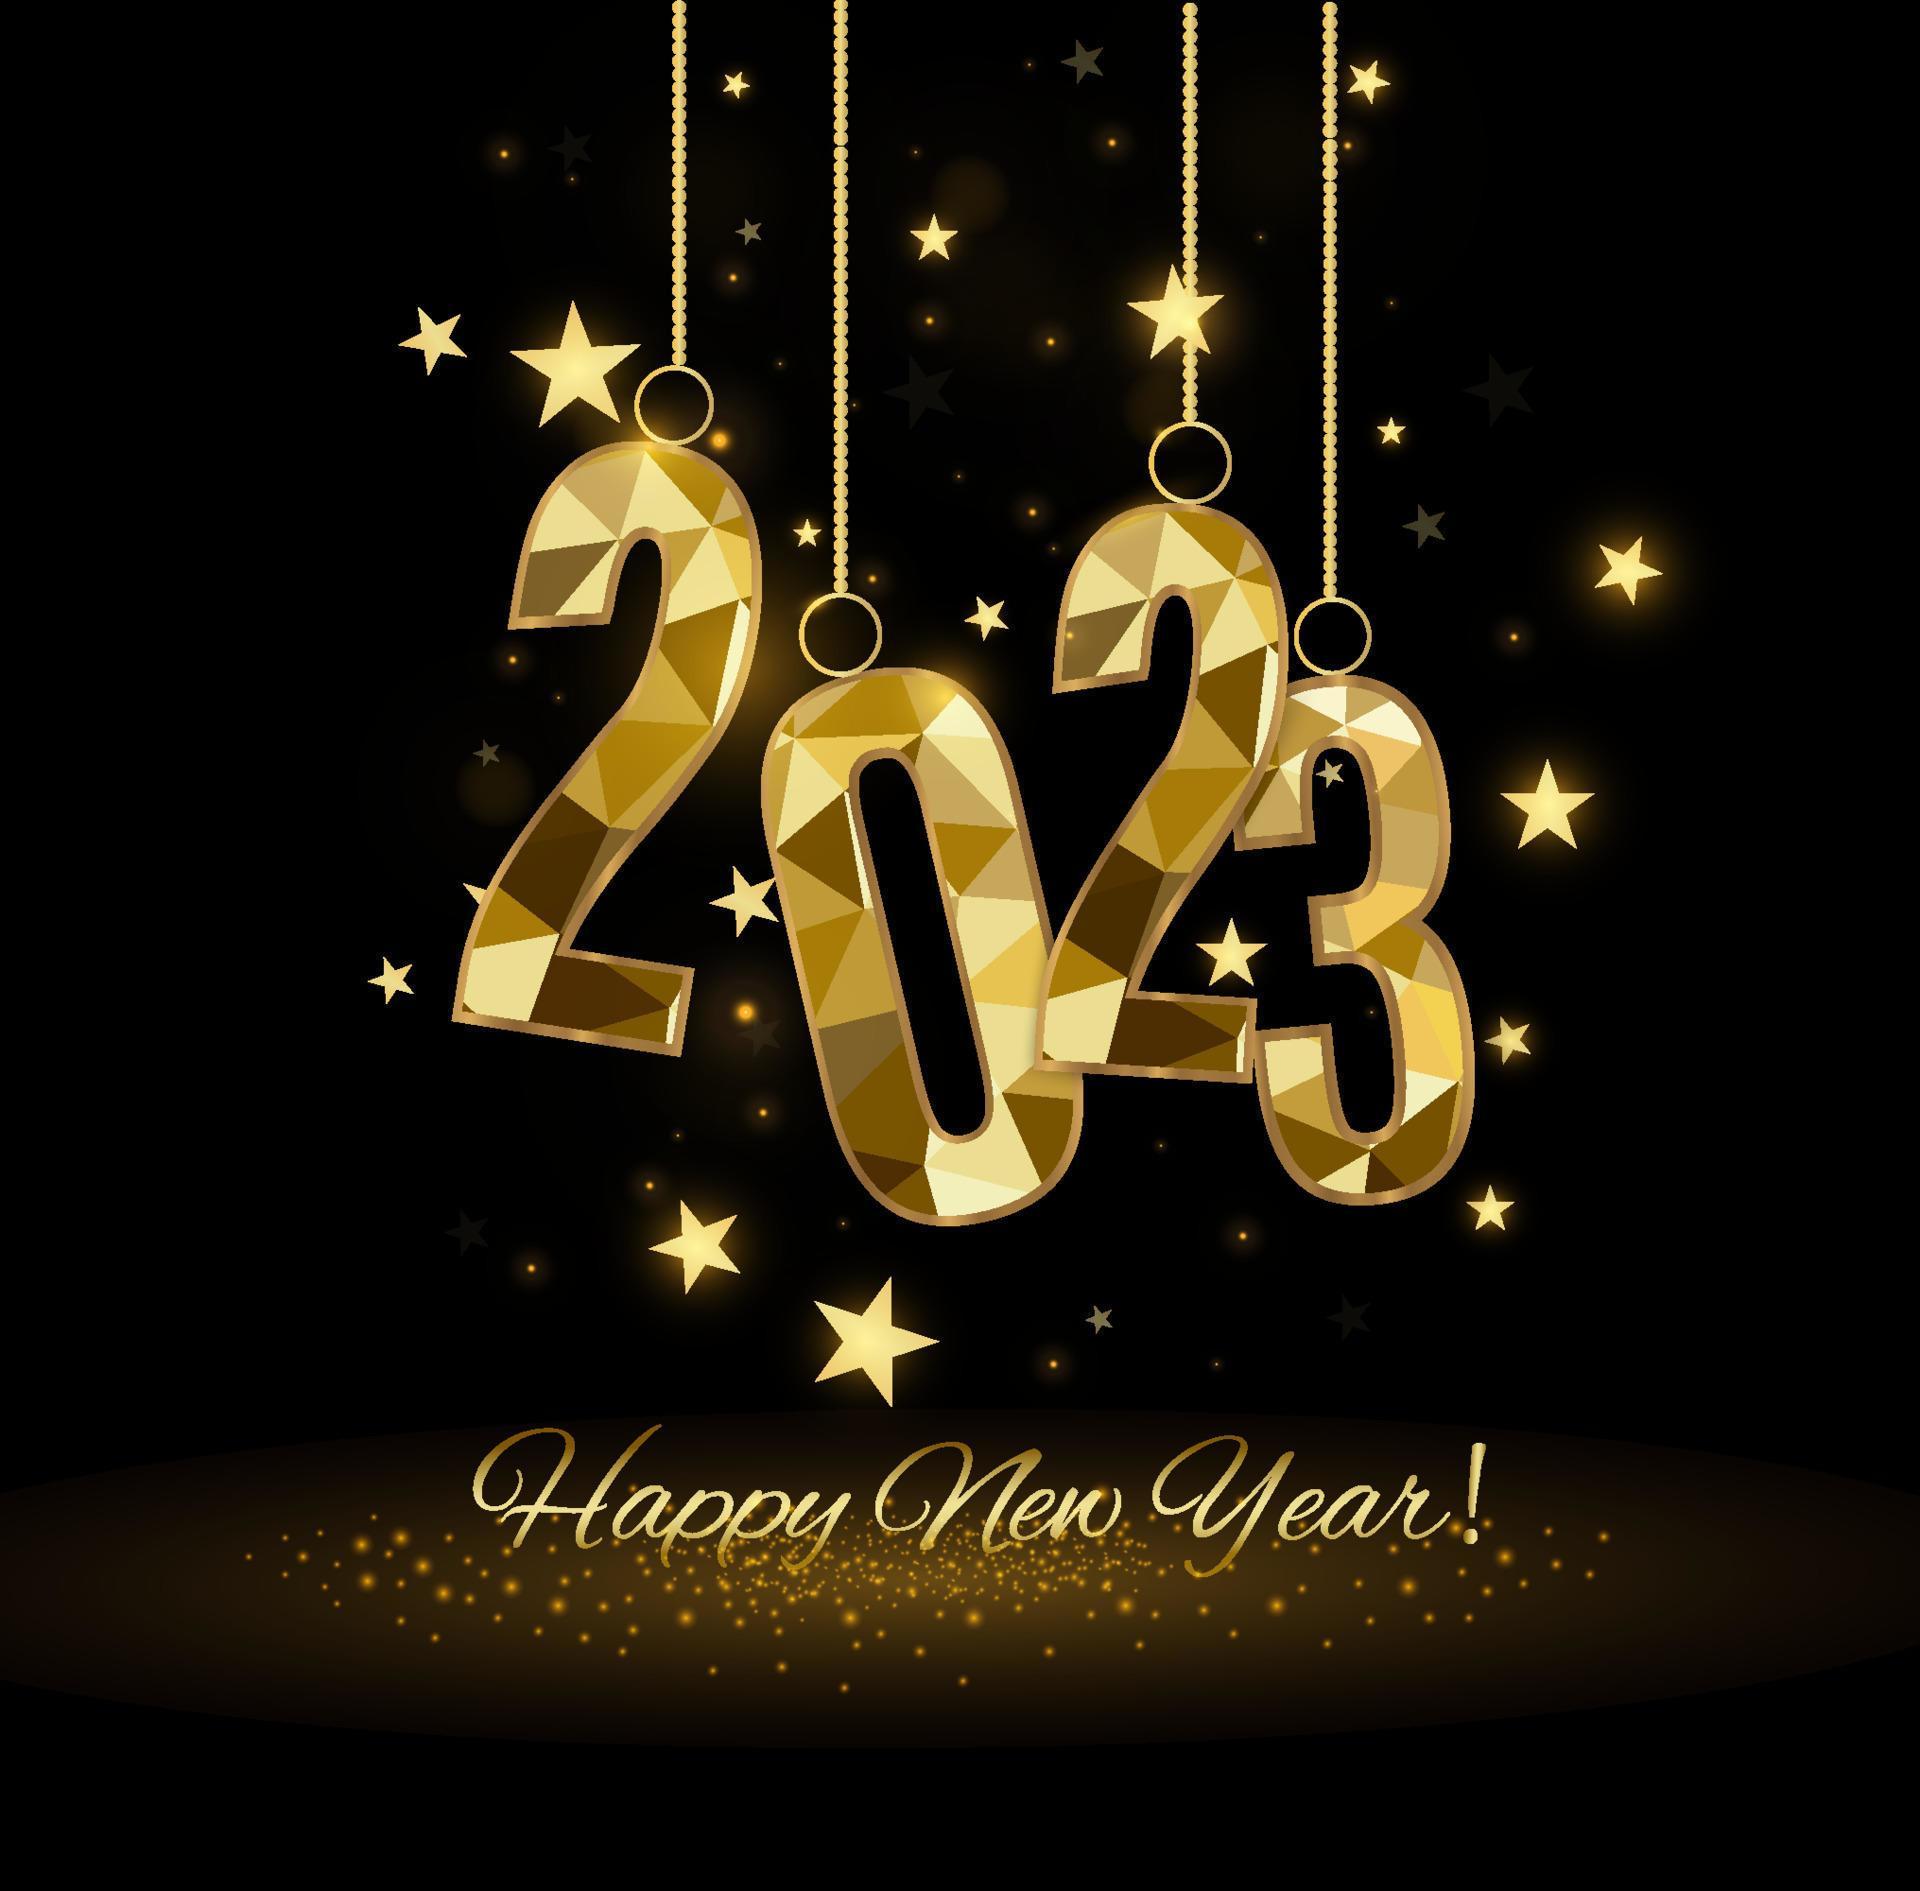 2023 Happy New Year Background Design Postcard Banner Poster Illustration Wishing You Happy New Year 2021 Lines Handwritten Lettering Typography Design Sparkling Gold Star Free Vector 1